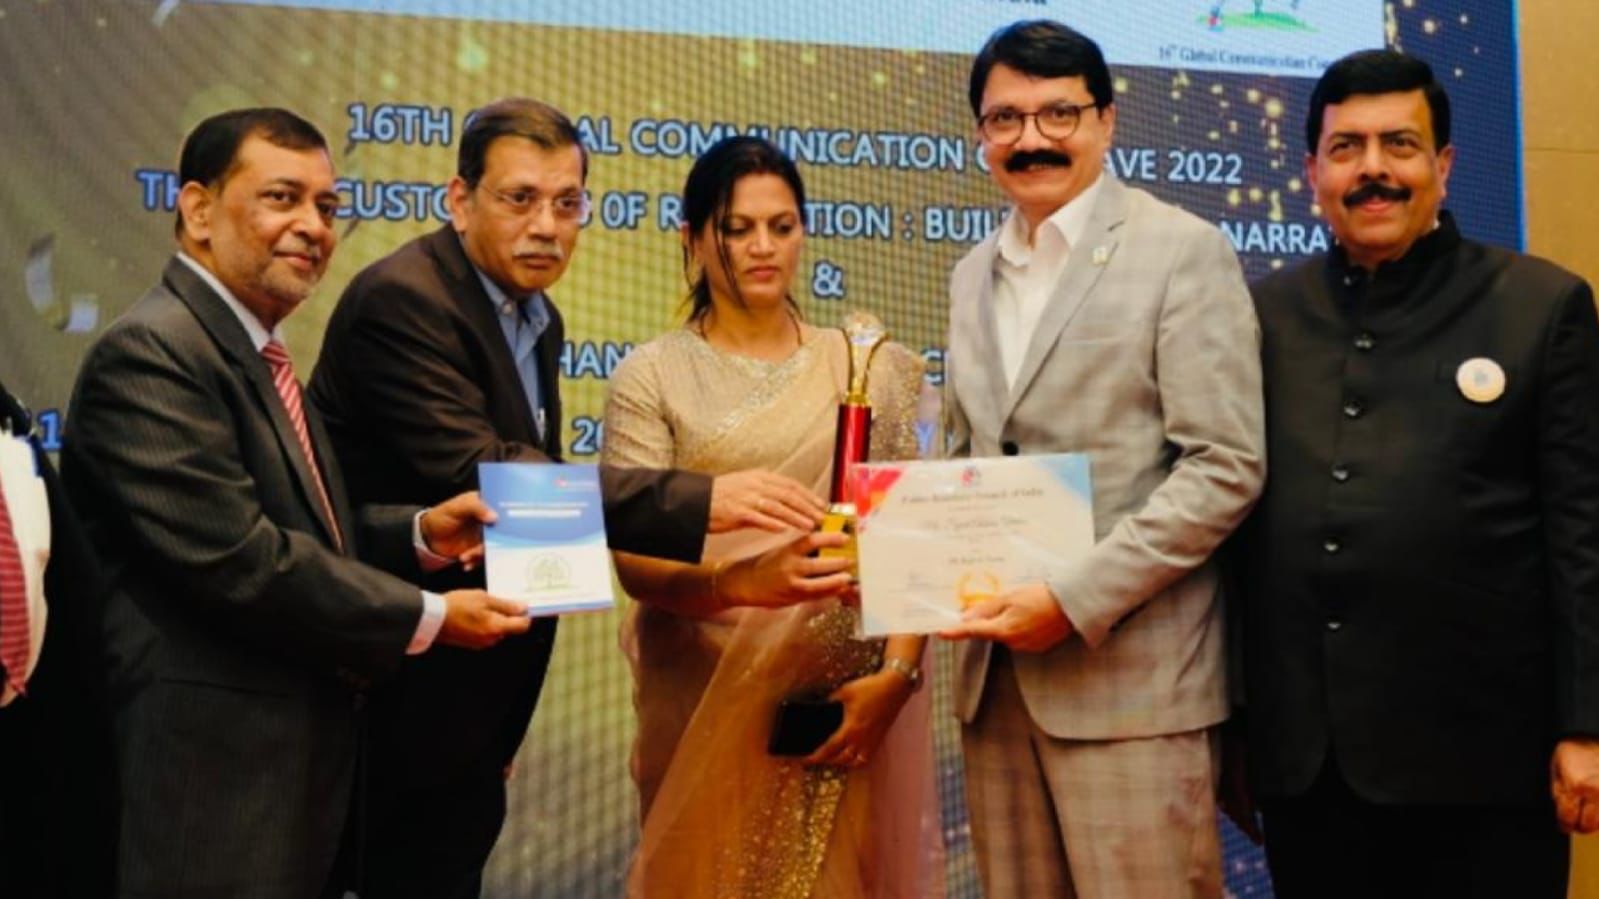 ‘Hall of Fame’ Award at the 16th Global Communication Conclave organised by PRCI